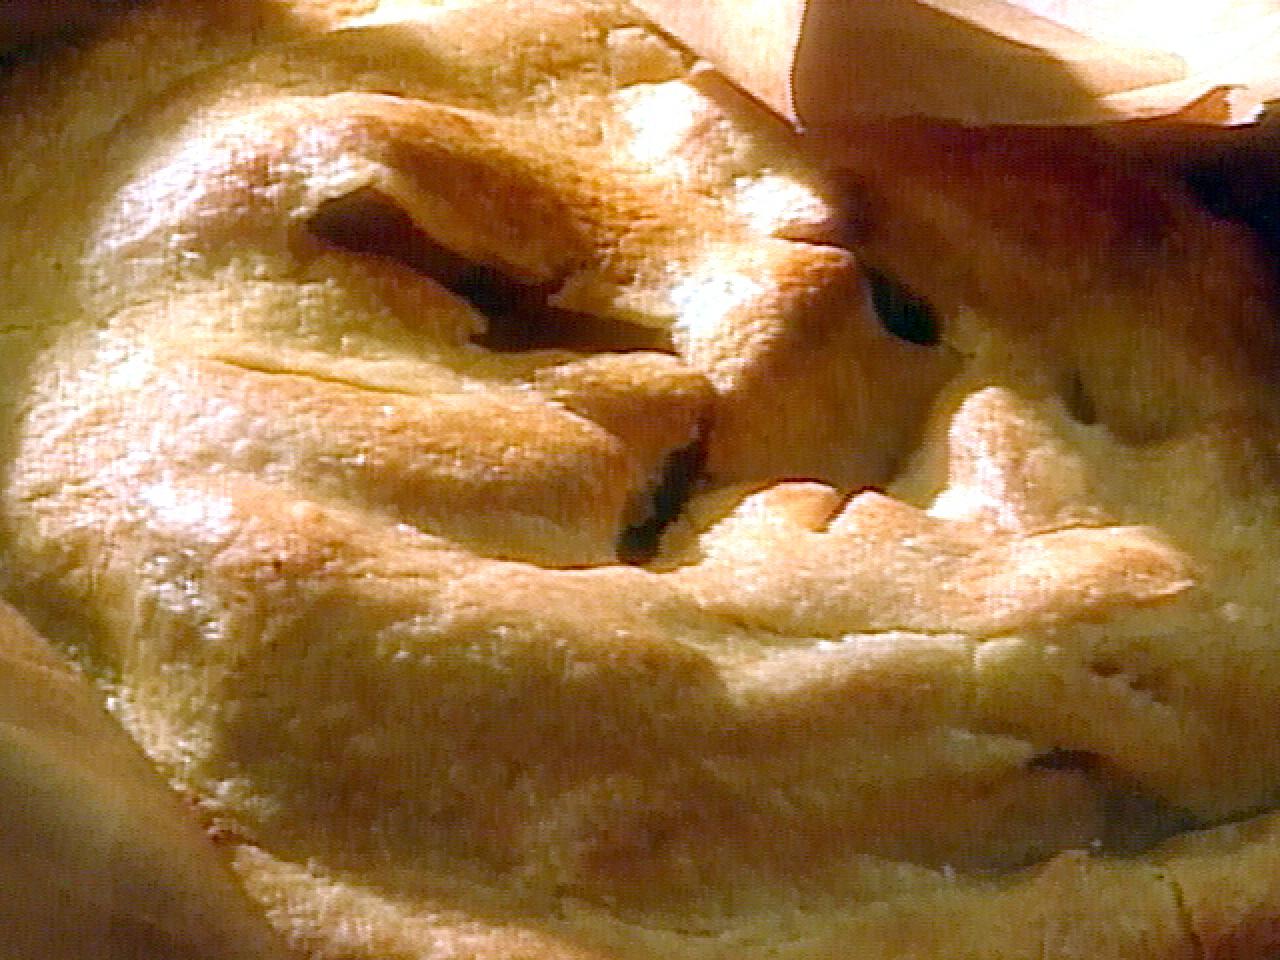 Apple Pie Baked in a Paper Bag®